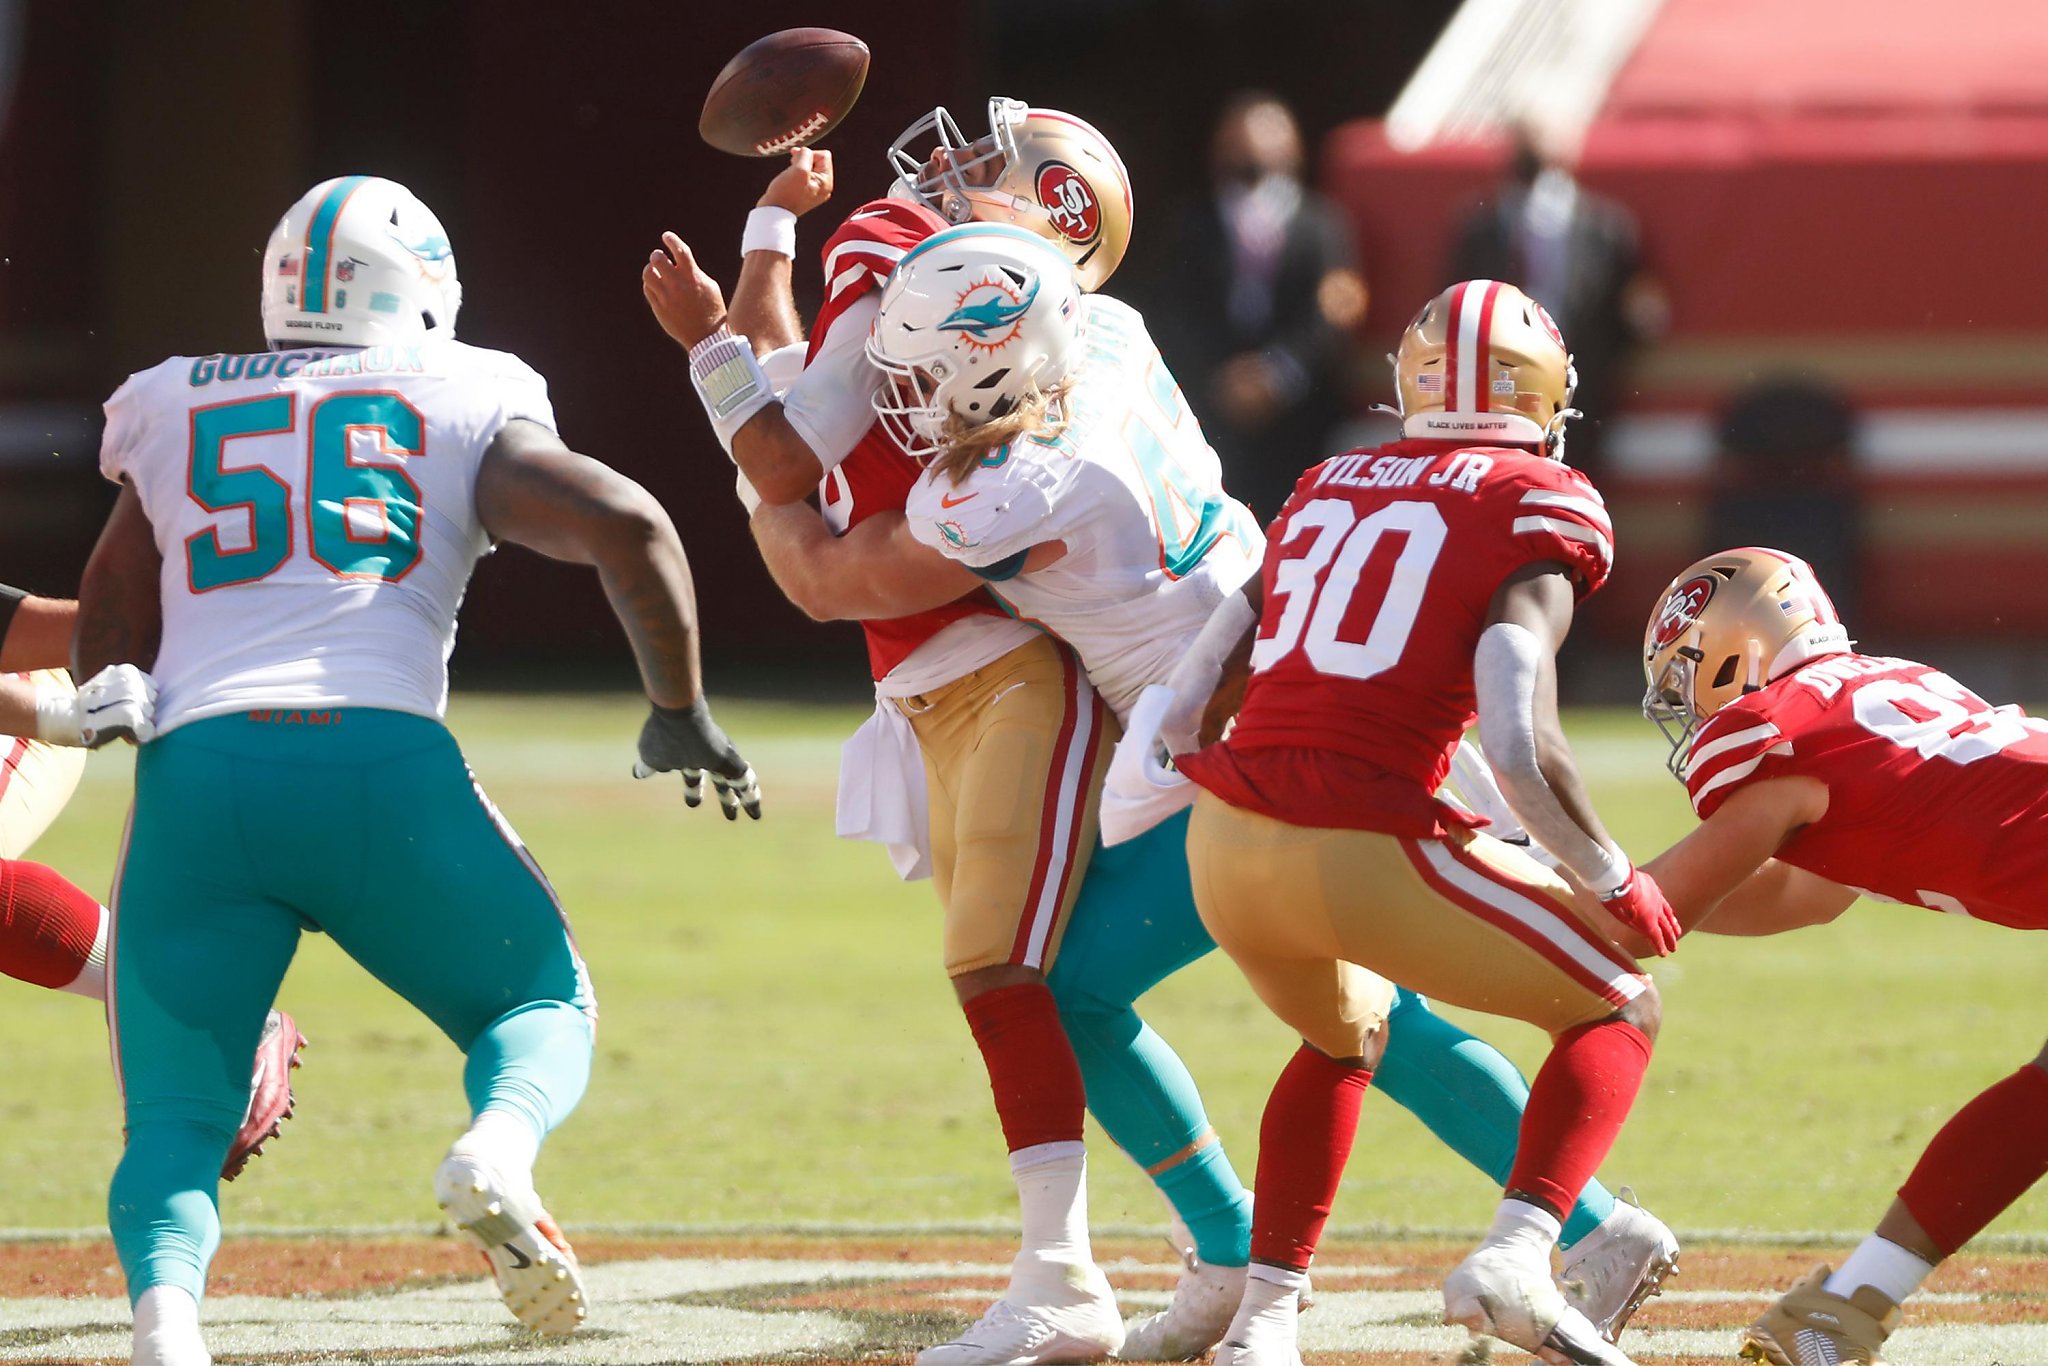 49ers vs dolphins 2020